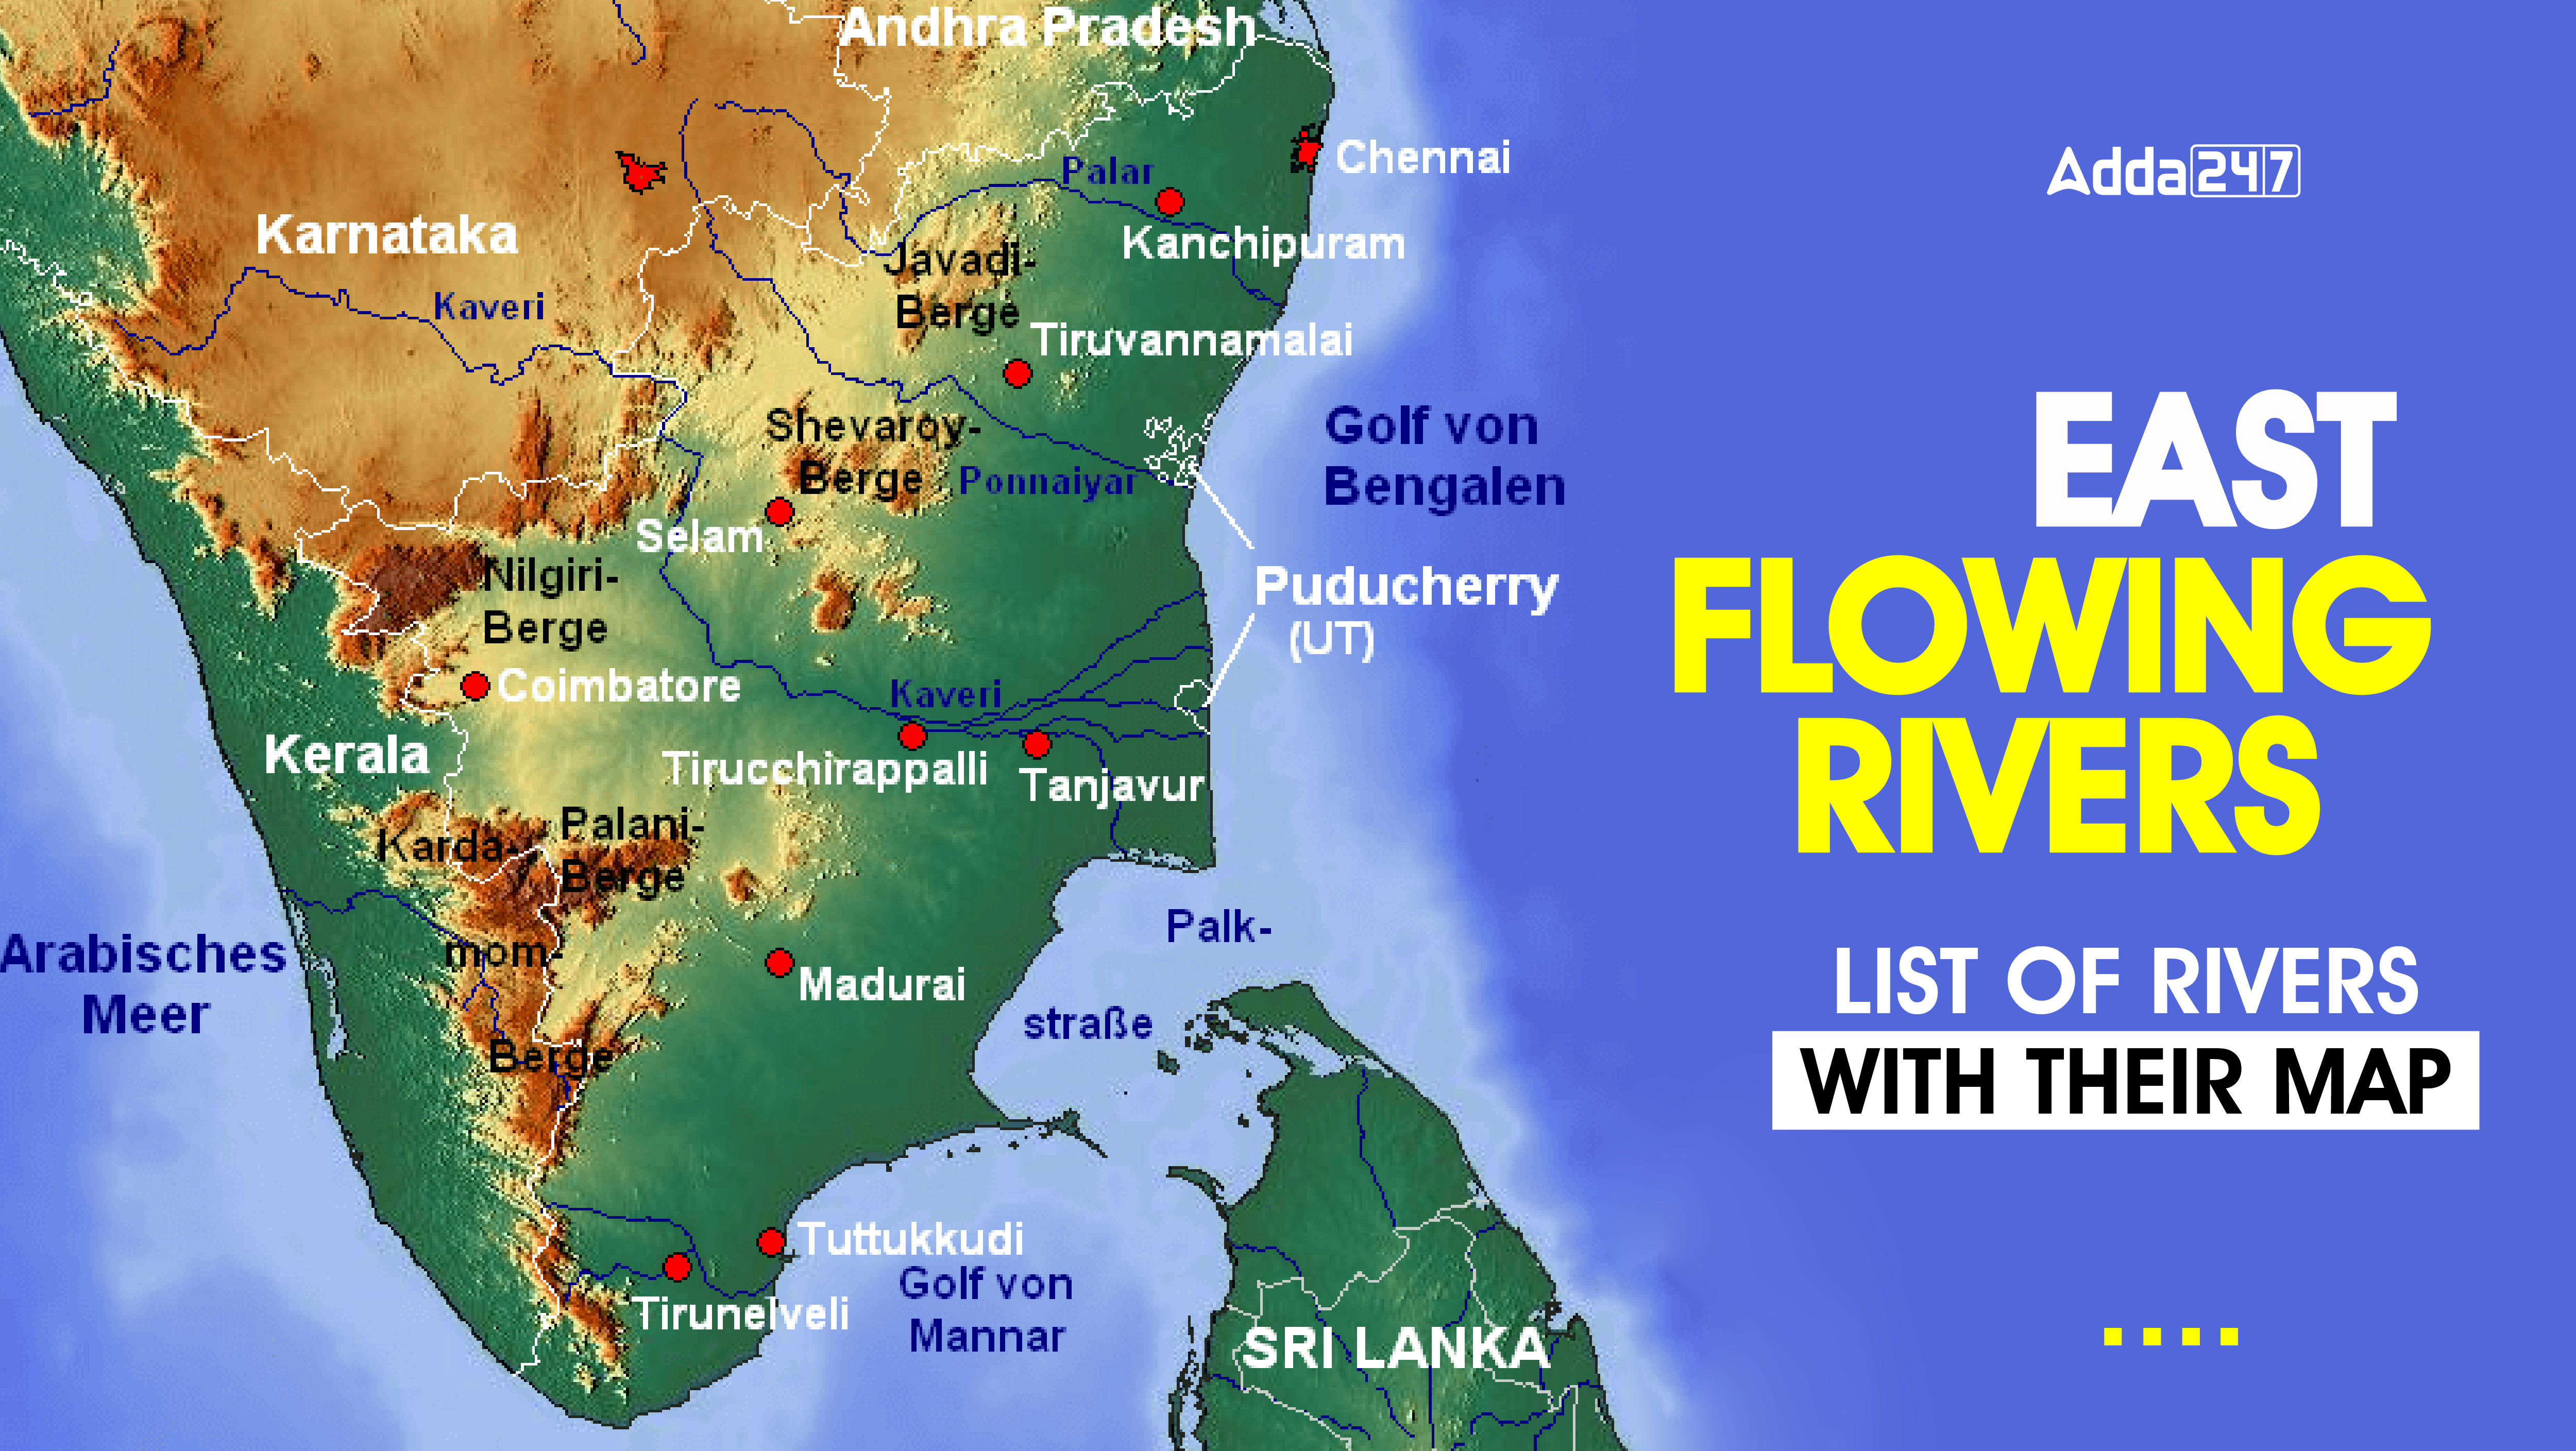 East Flowing Rivers, List of Rivers With Their Map